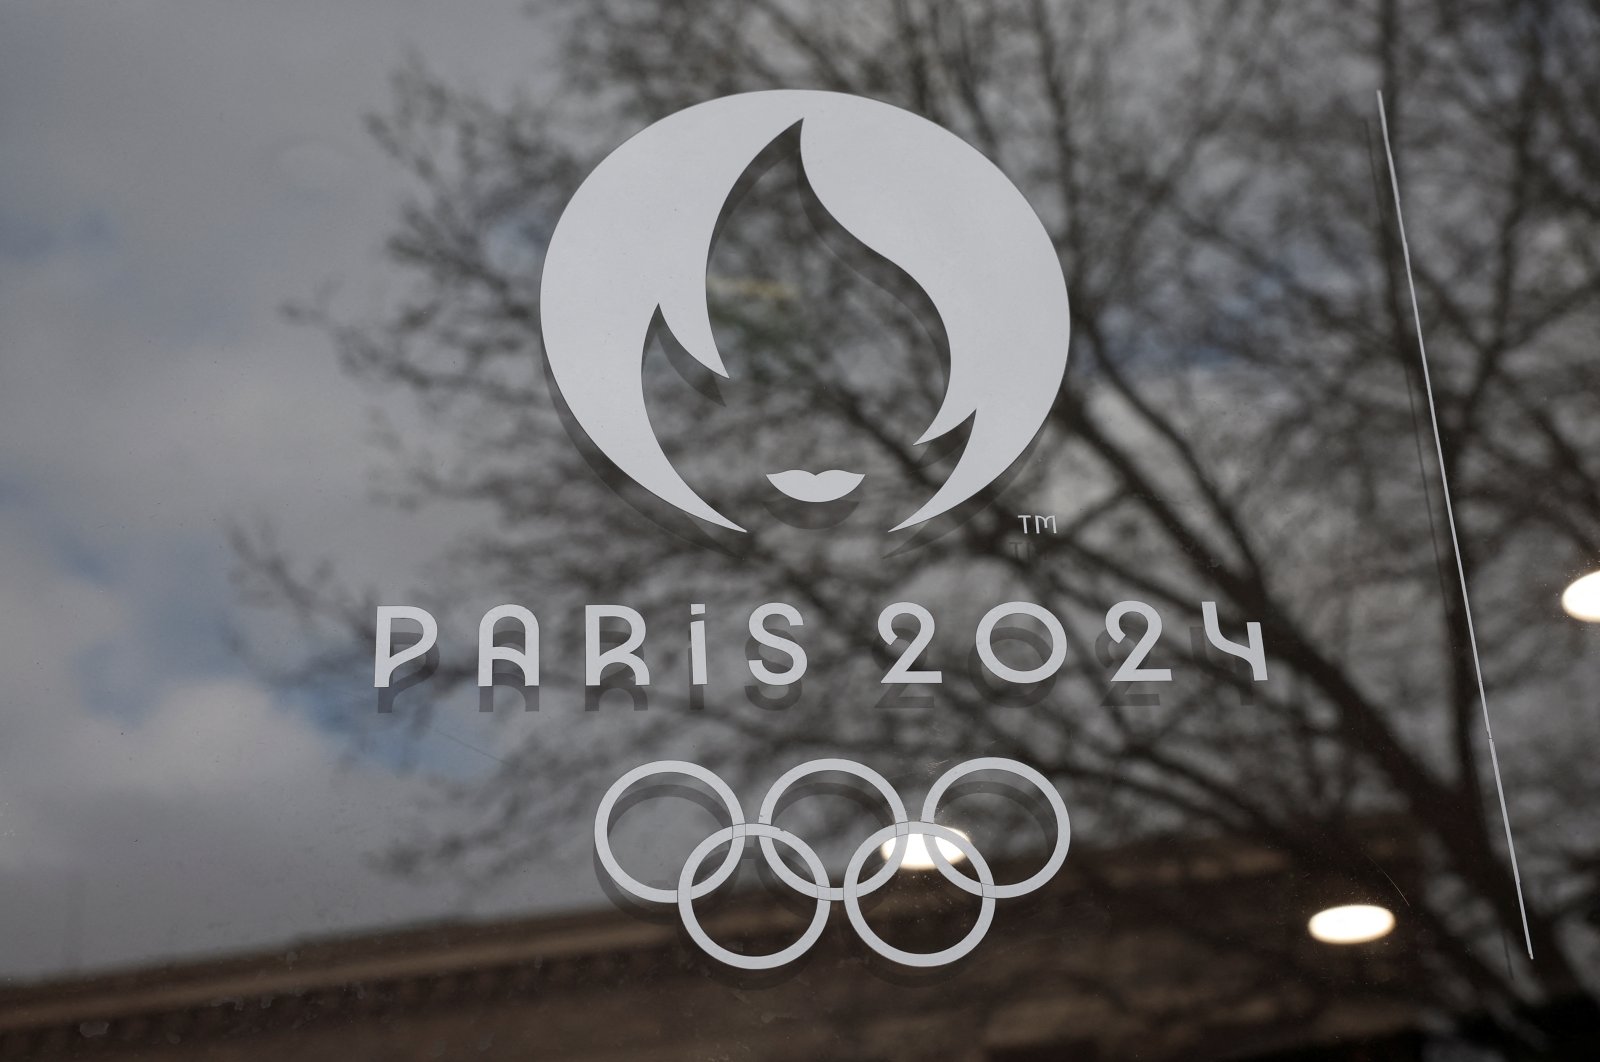 A view shows the logo of the Paris 2024 Olympic and Paralympic Games, Paris, France, March 19, 2024. (Reuters Photo)